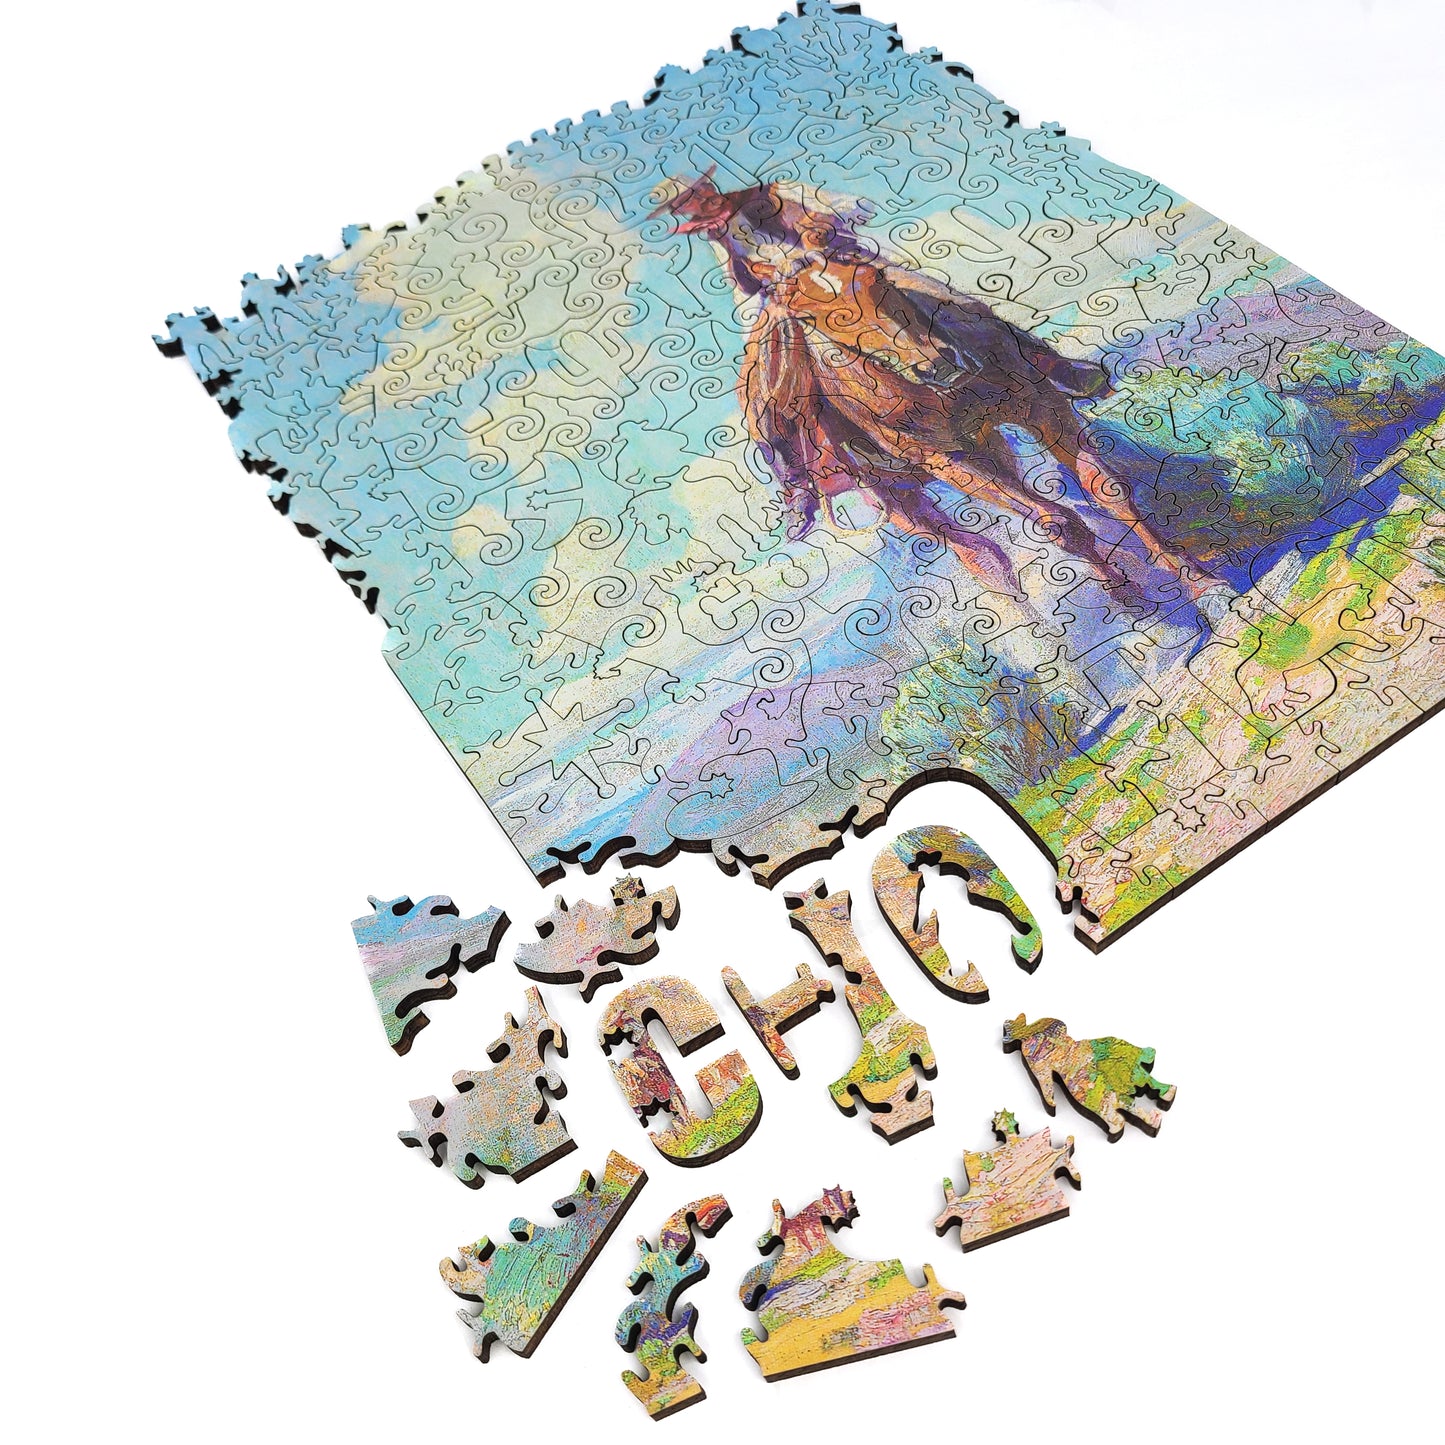 Large Format Wooden Jigsaw Puzzle with Uniquely Shaped Pieces for Seniors and Adults - 190 Pieces - The Trail Foreman